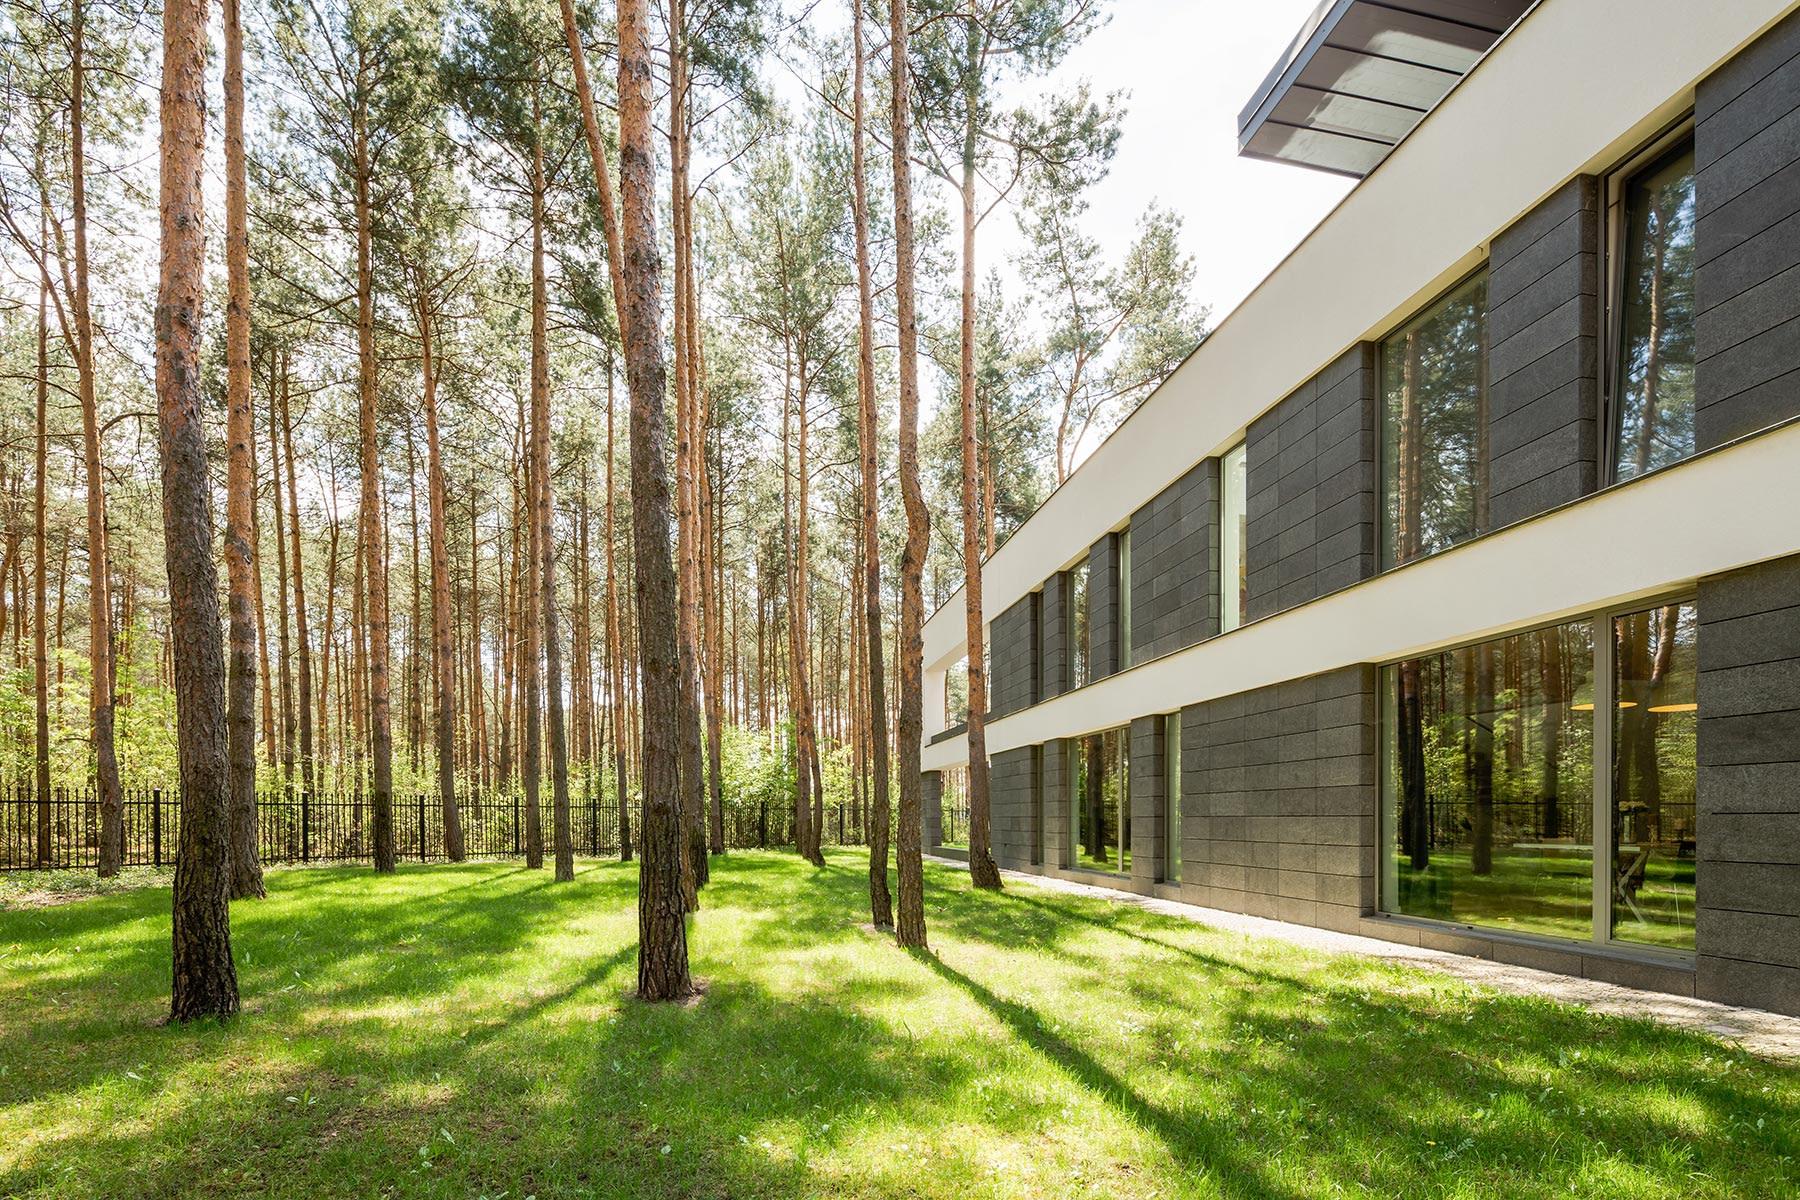 modern-house-surrounded-by-trees-PVRWSYN